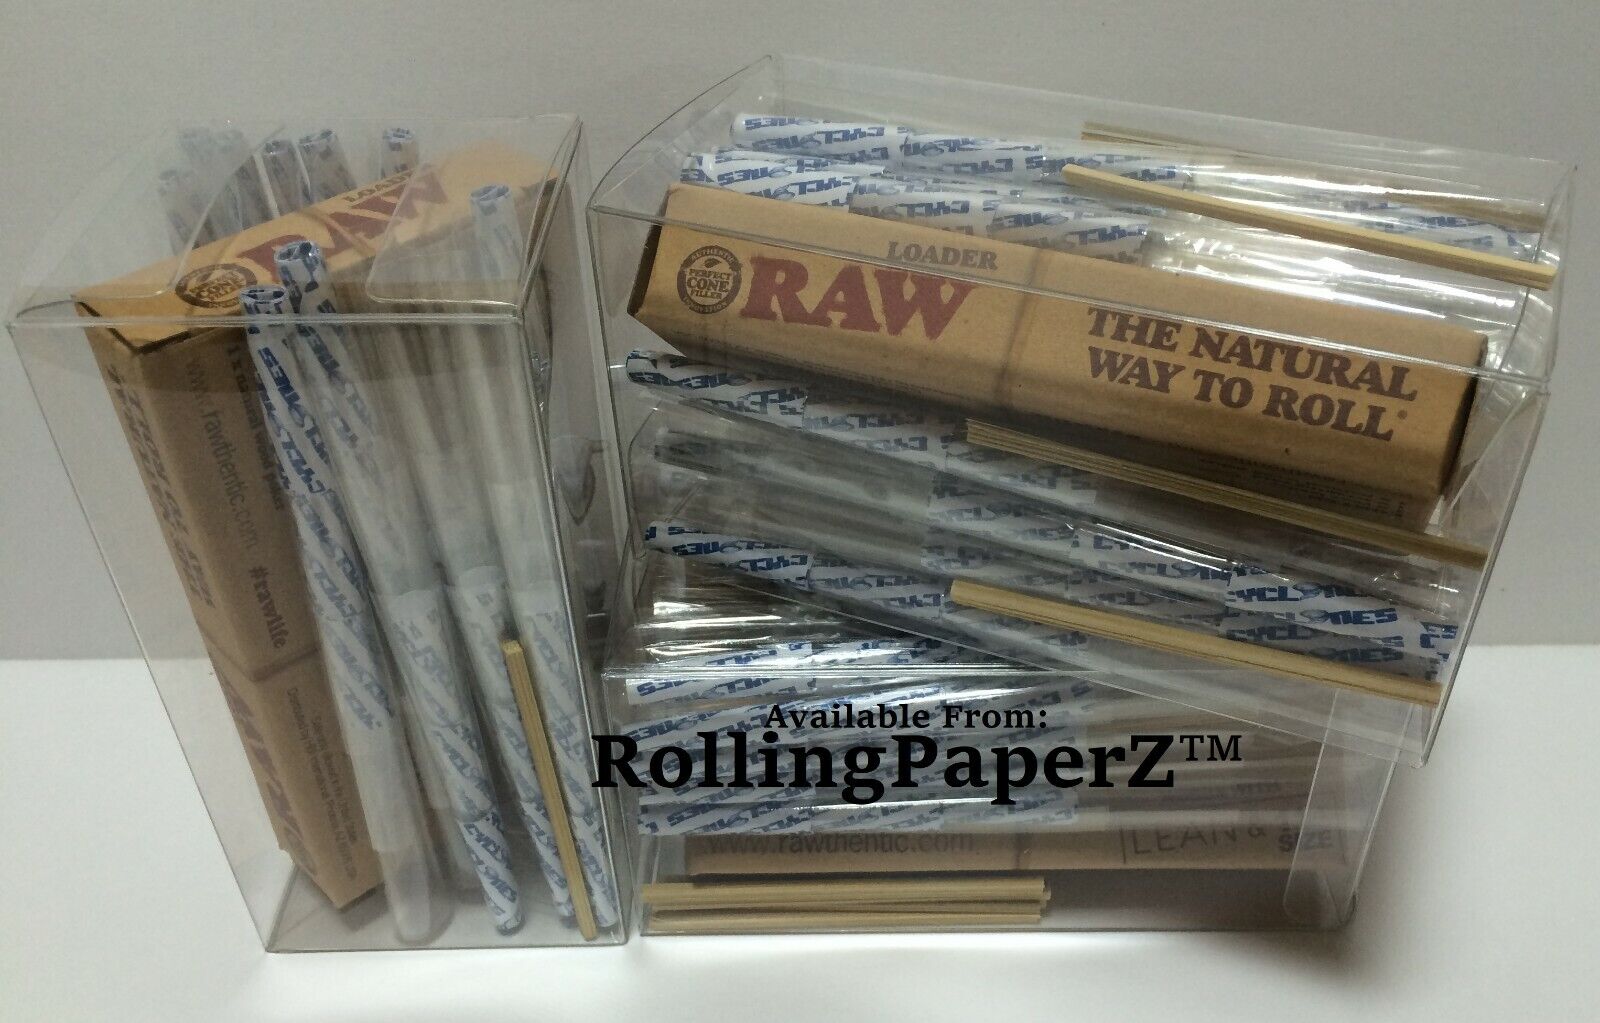 60 Count CYCLONES CLEAR 1 1/4 Size PRE ROLLED CONES + RAW LOADER+POKER+FILL CARD